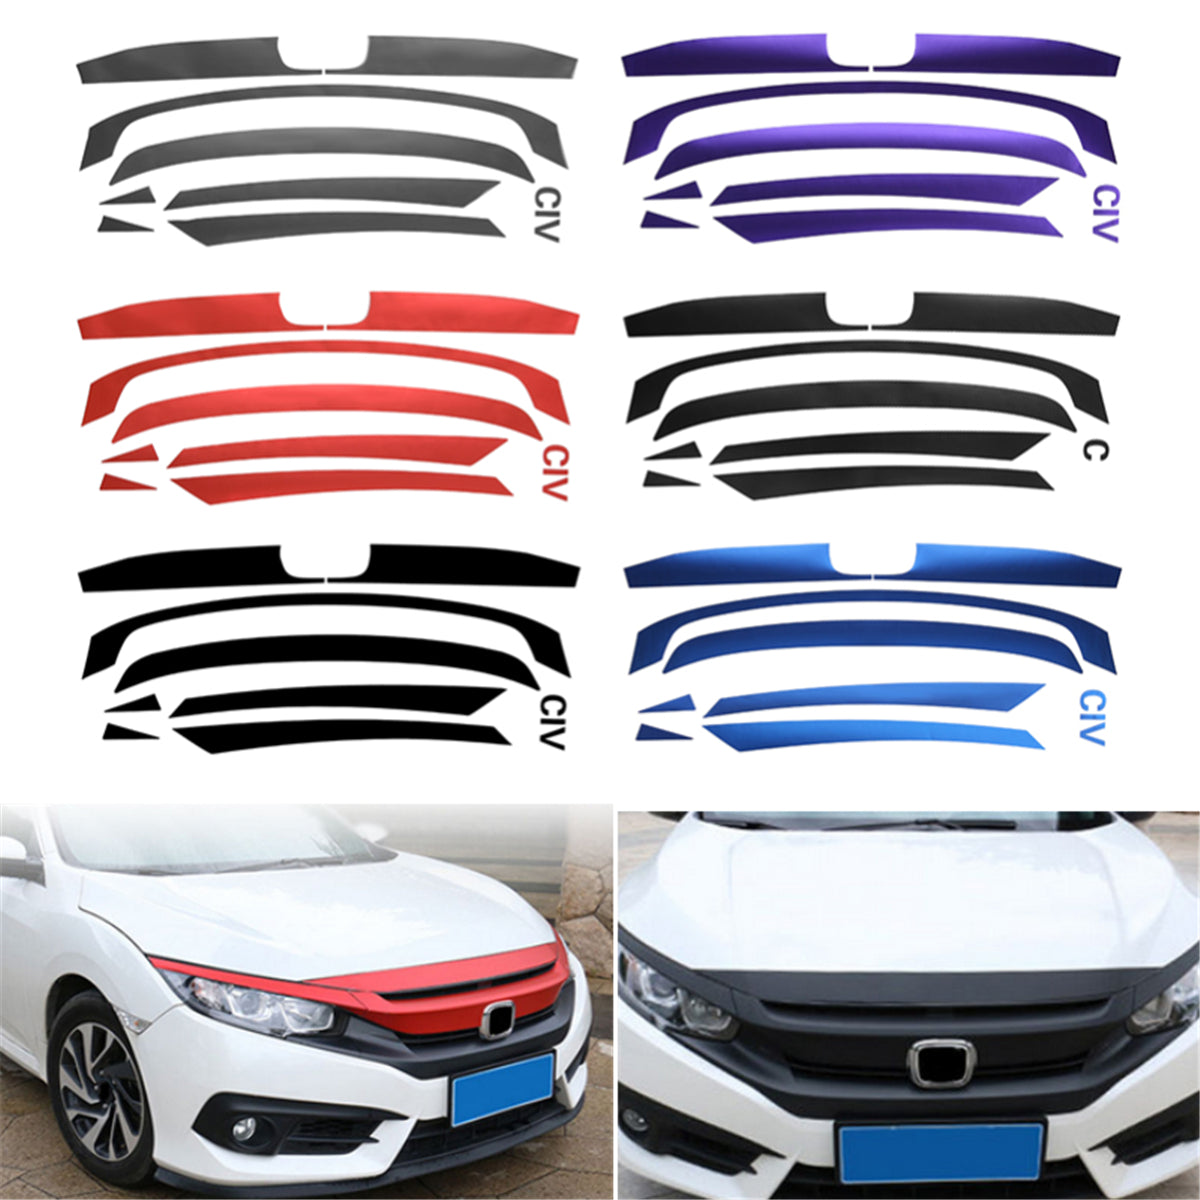 White Smoke Front Bumper Grille Sticker Decal Fit Honda Civic 10th 2016-17 Grill Decoration